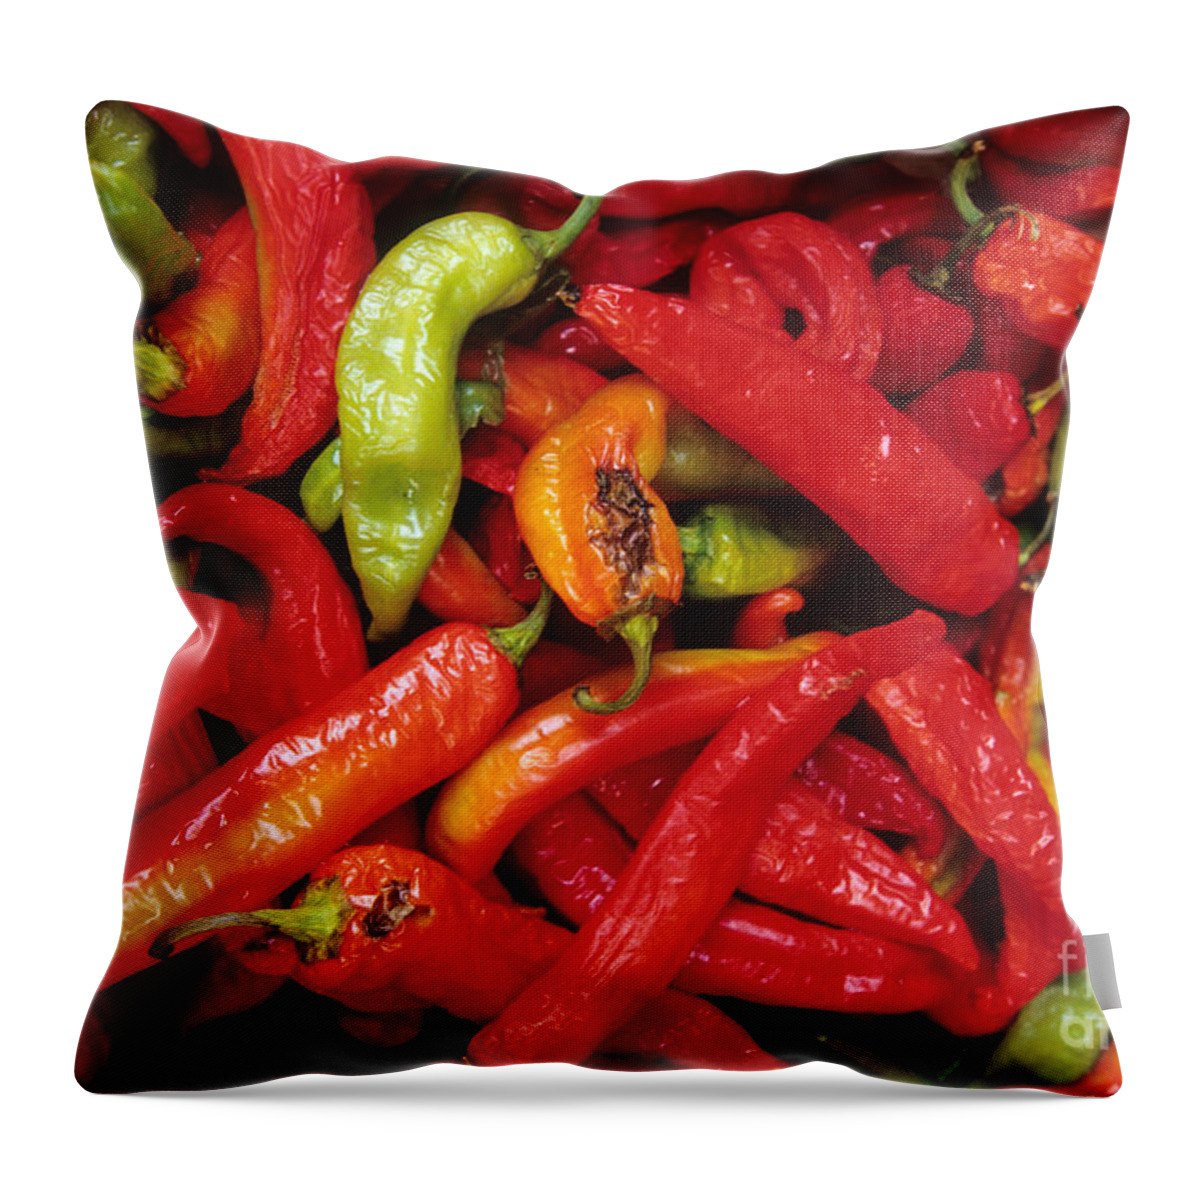 Peppers Throw Pillow featuring the photograph Peppers At Street Market by William H. Mullins